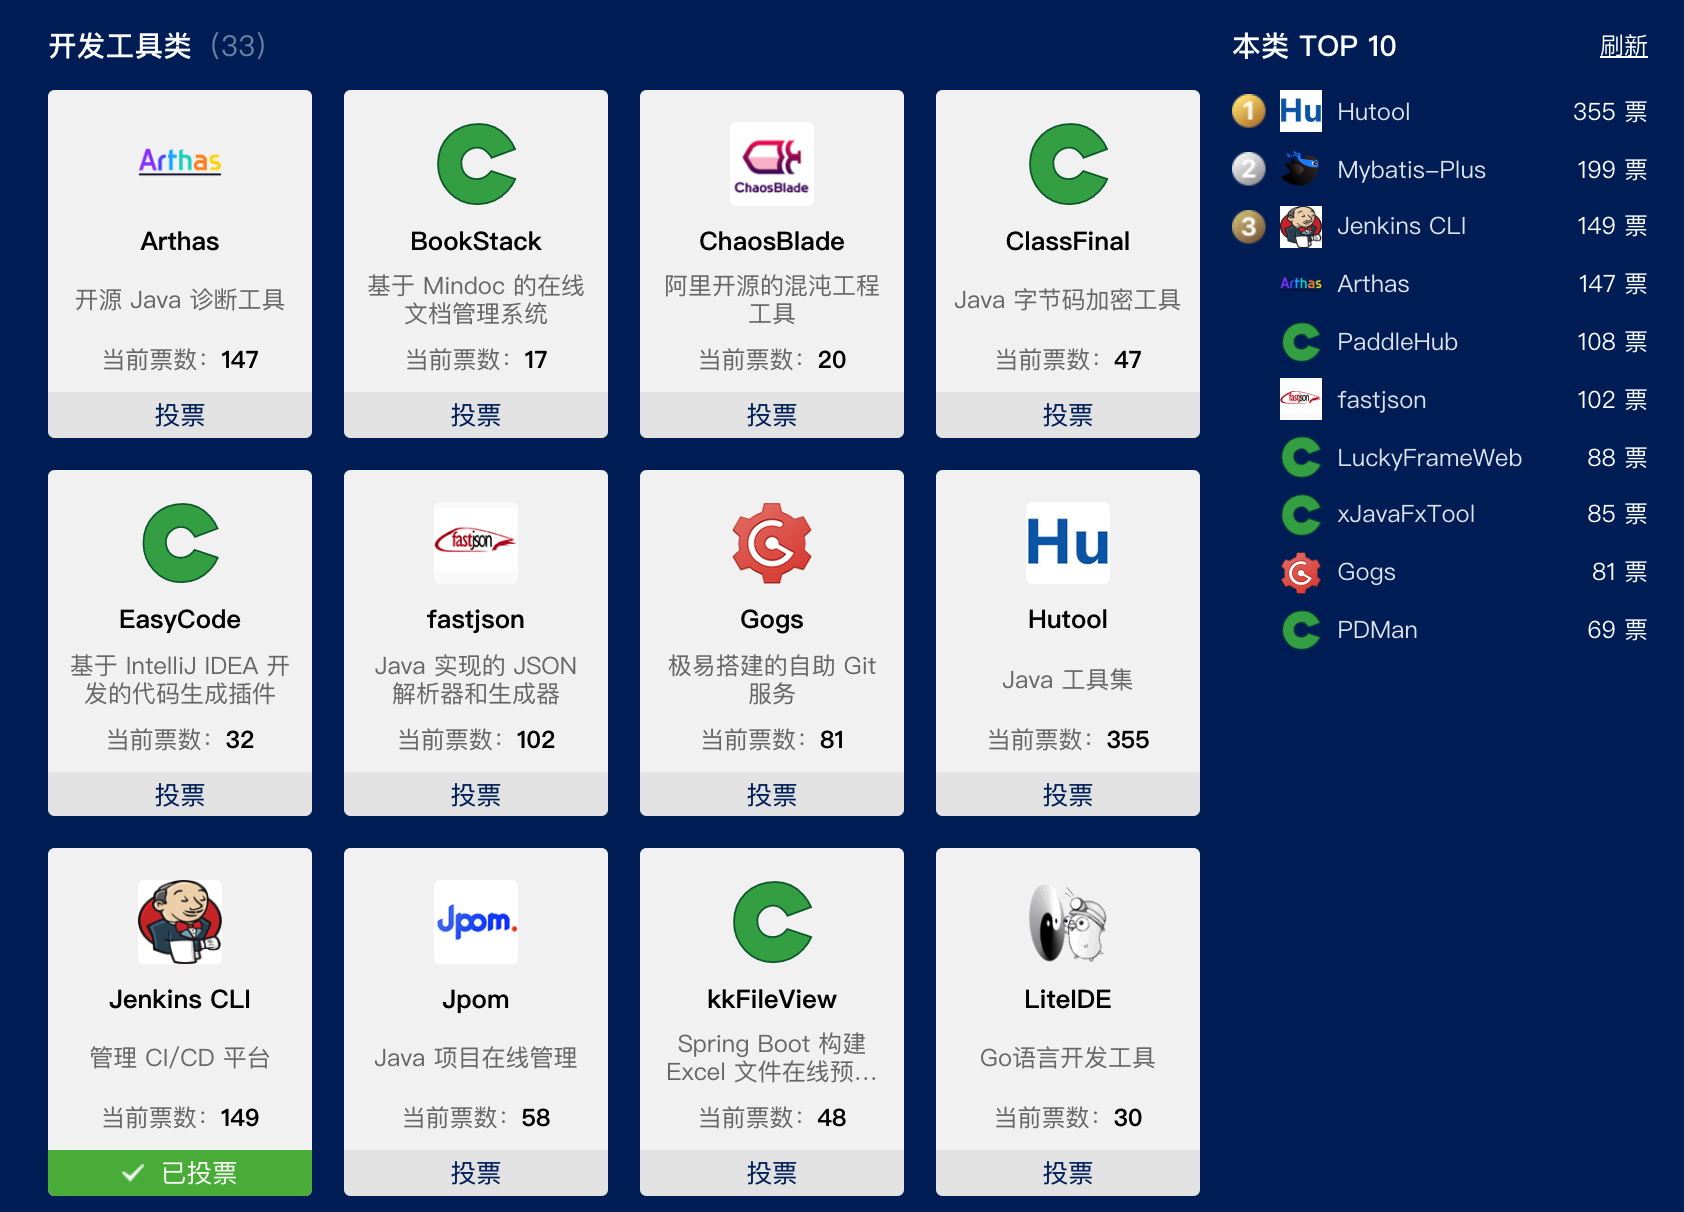 wechat/articles/2019/11/2019-11-20-jenkins-cli-help-you-manage-jenkins/vote-page.png